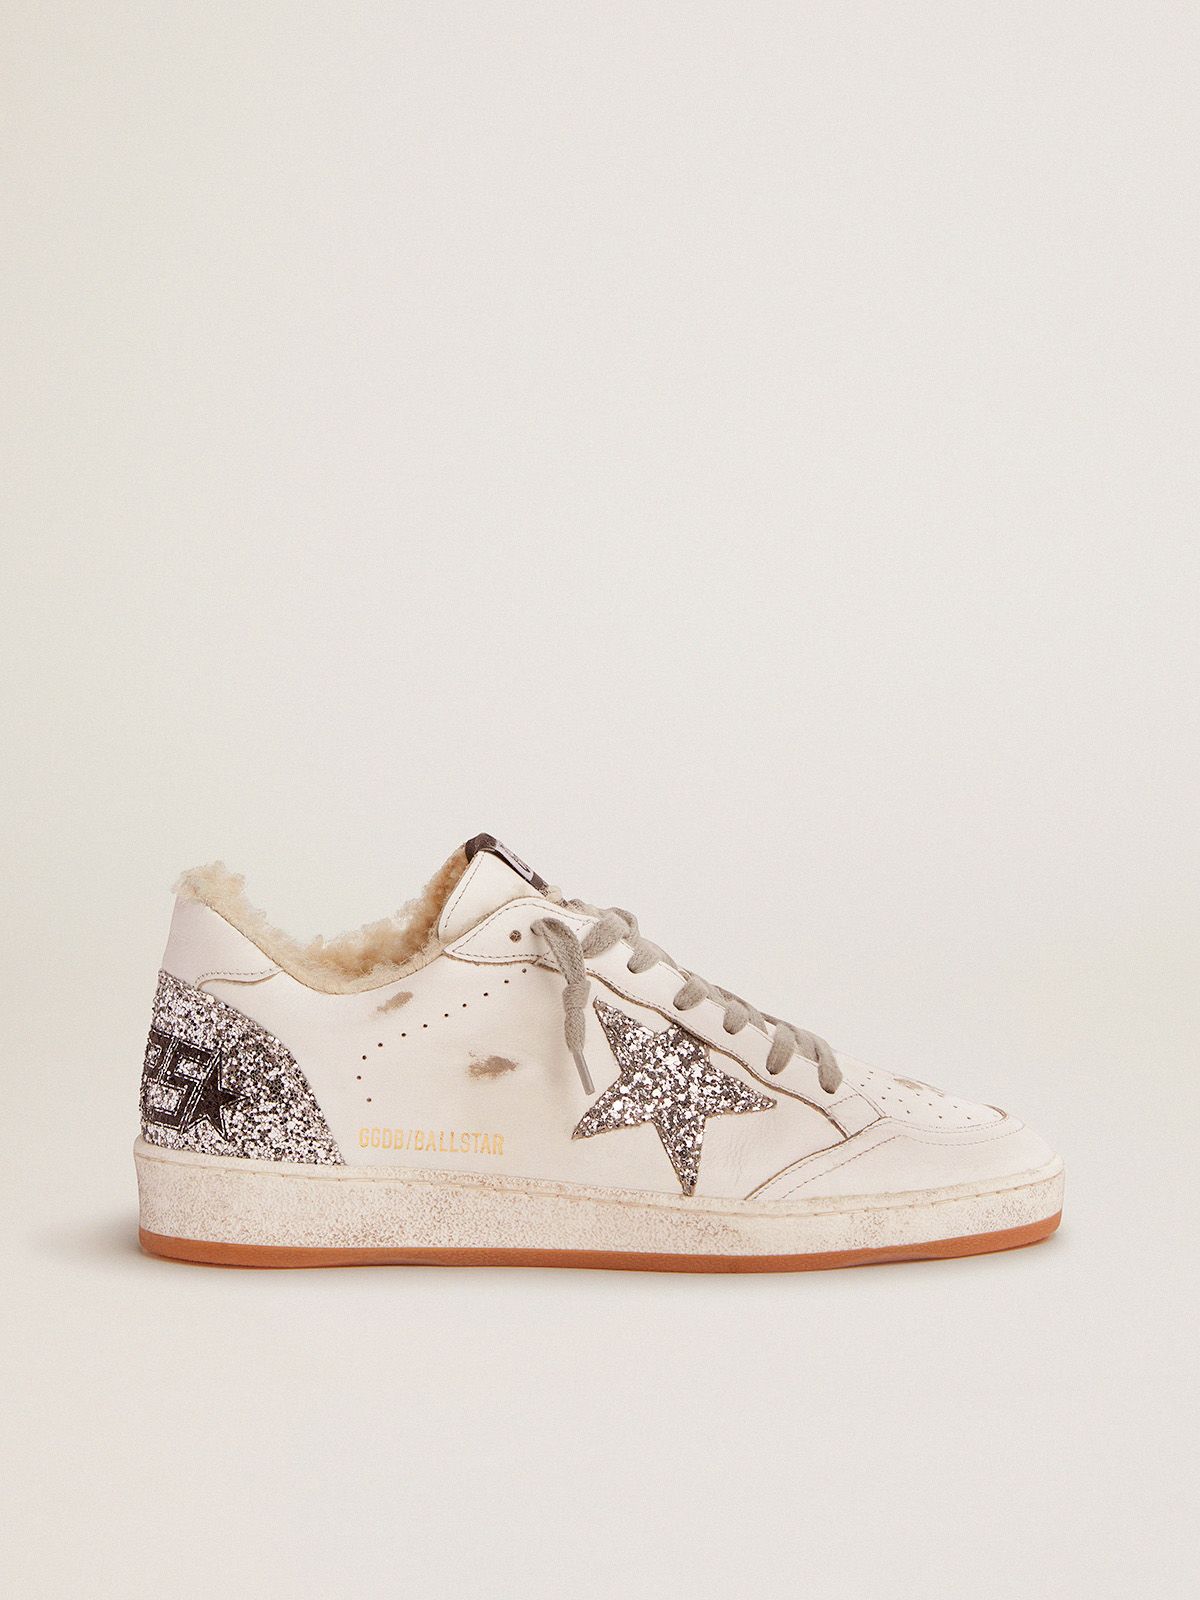 Ball Star sneakers in white leather with silver glitter details and shearling lining | 